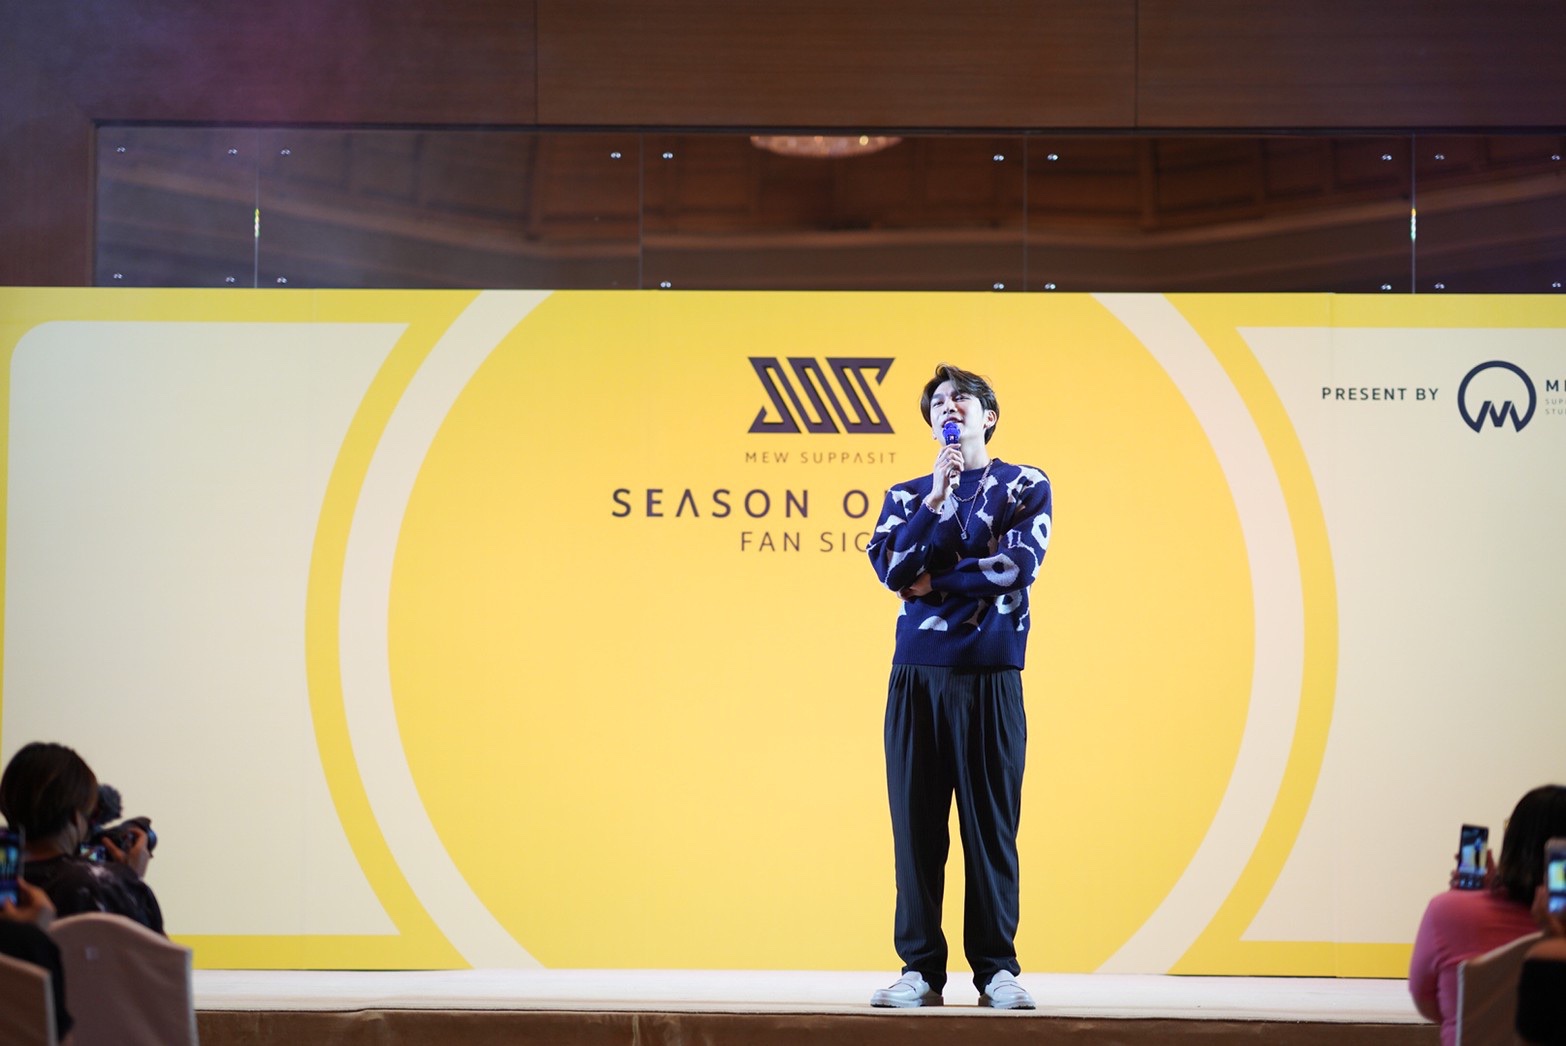 SEASON OF YOU FAN SIGN EVENT #1 